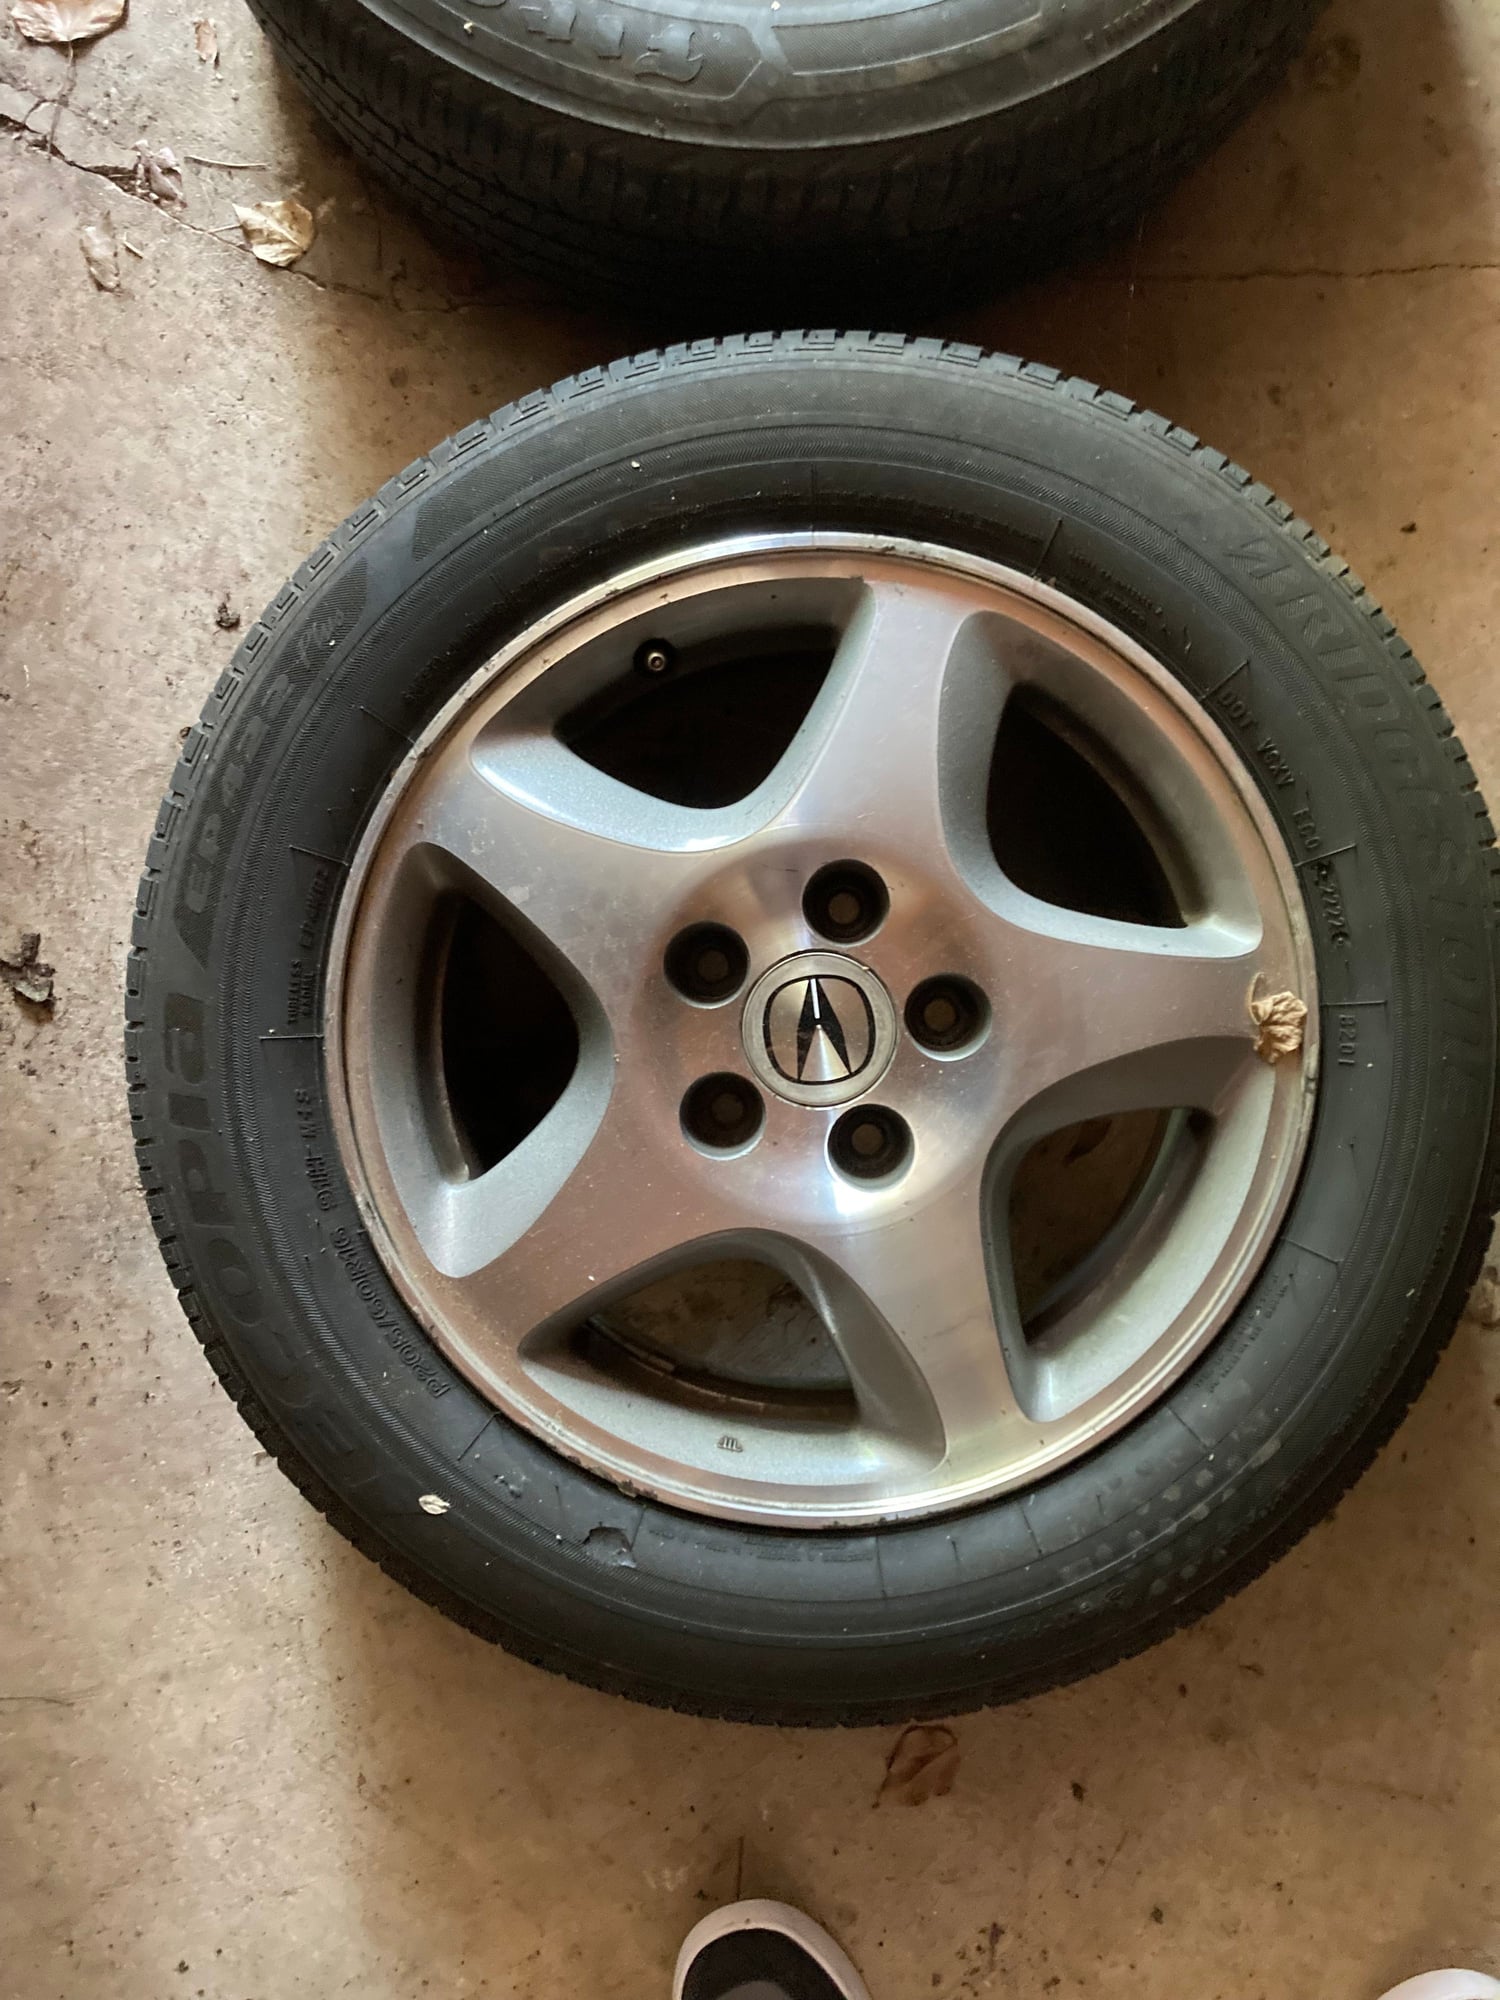 Wheels and Tires/Axles - FS: 2g TL - Base Rims - set of 4 - Used - -1 to 2025  All Models - Baltimore, MD 21229, United States